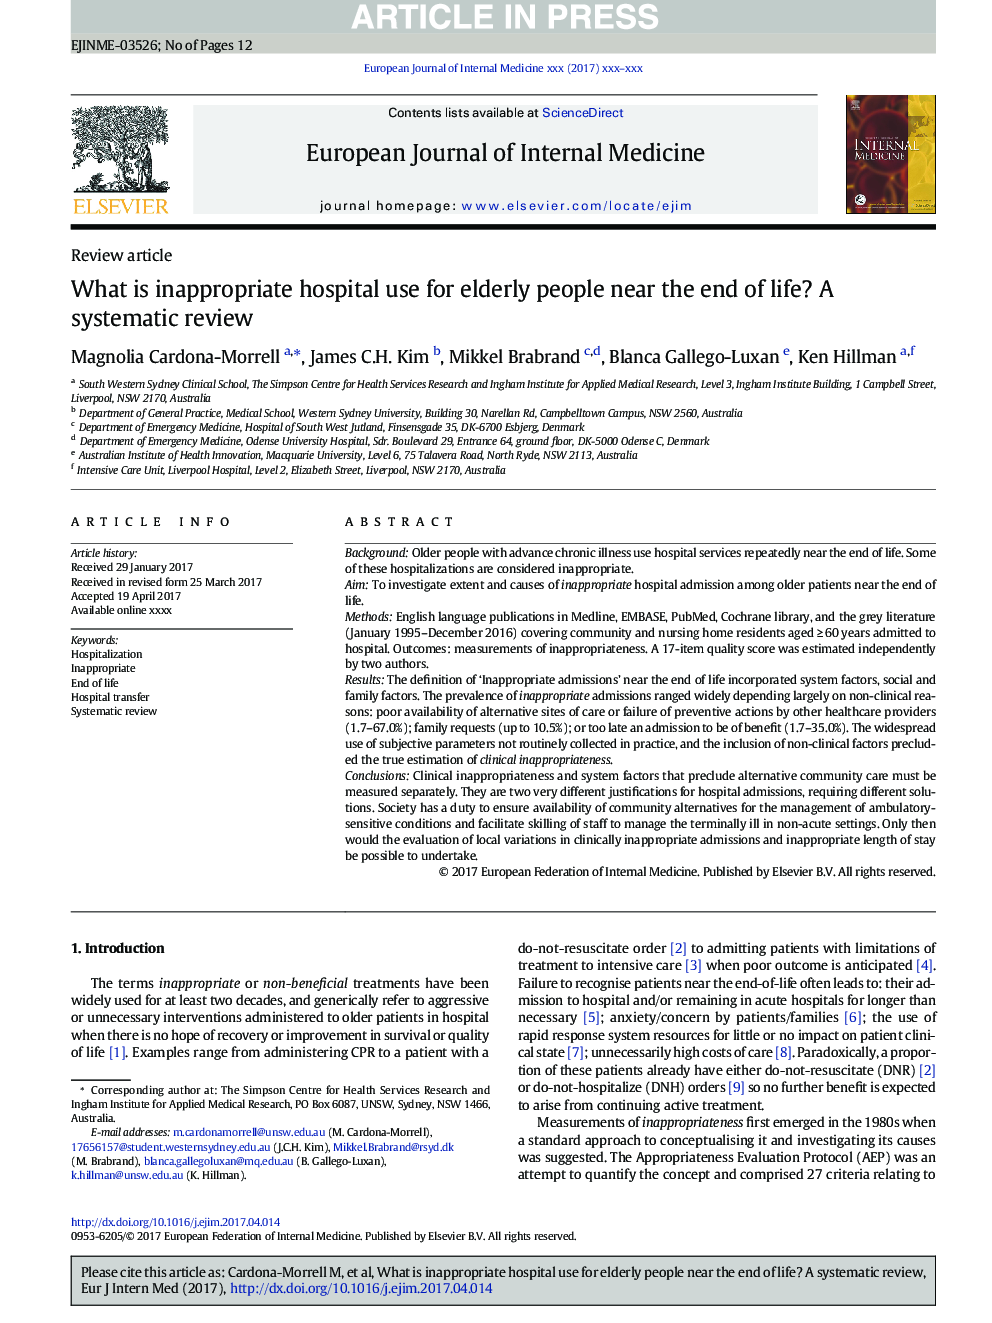 What is inappropriate hospital use for elderly people near the end of life? A systematic review